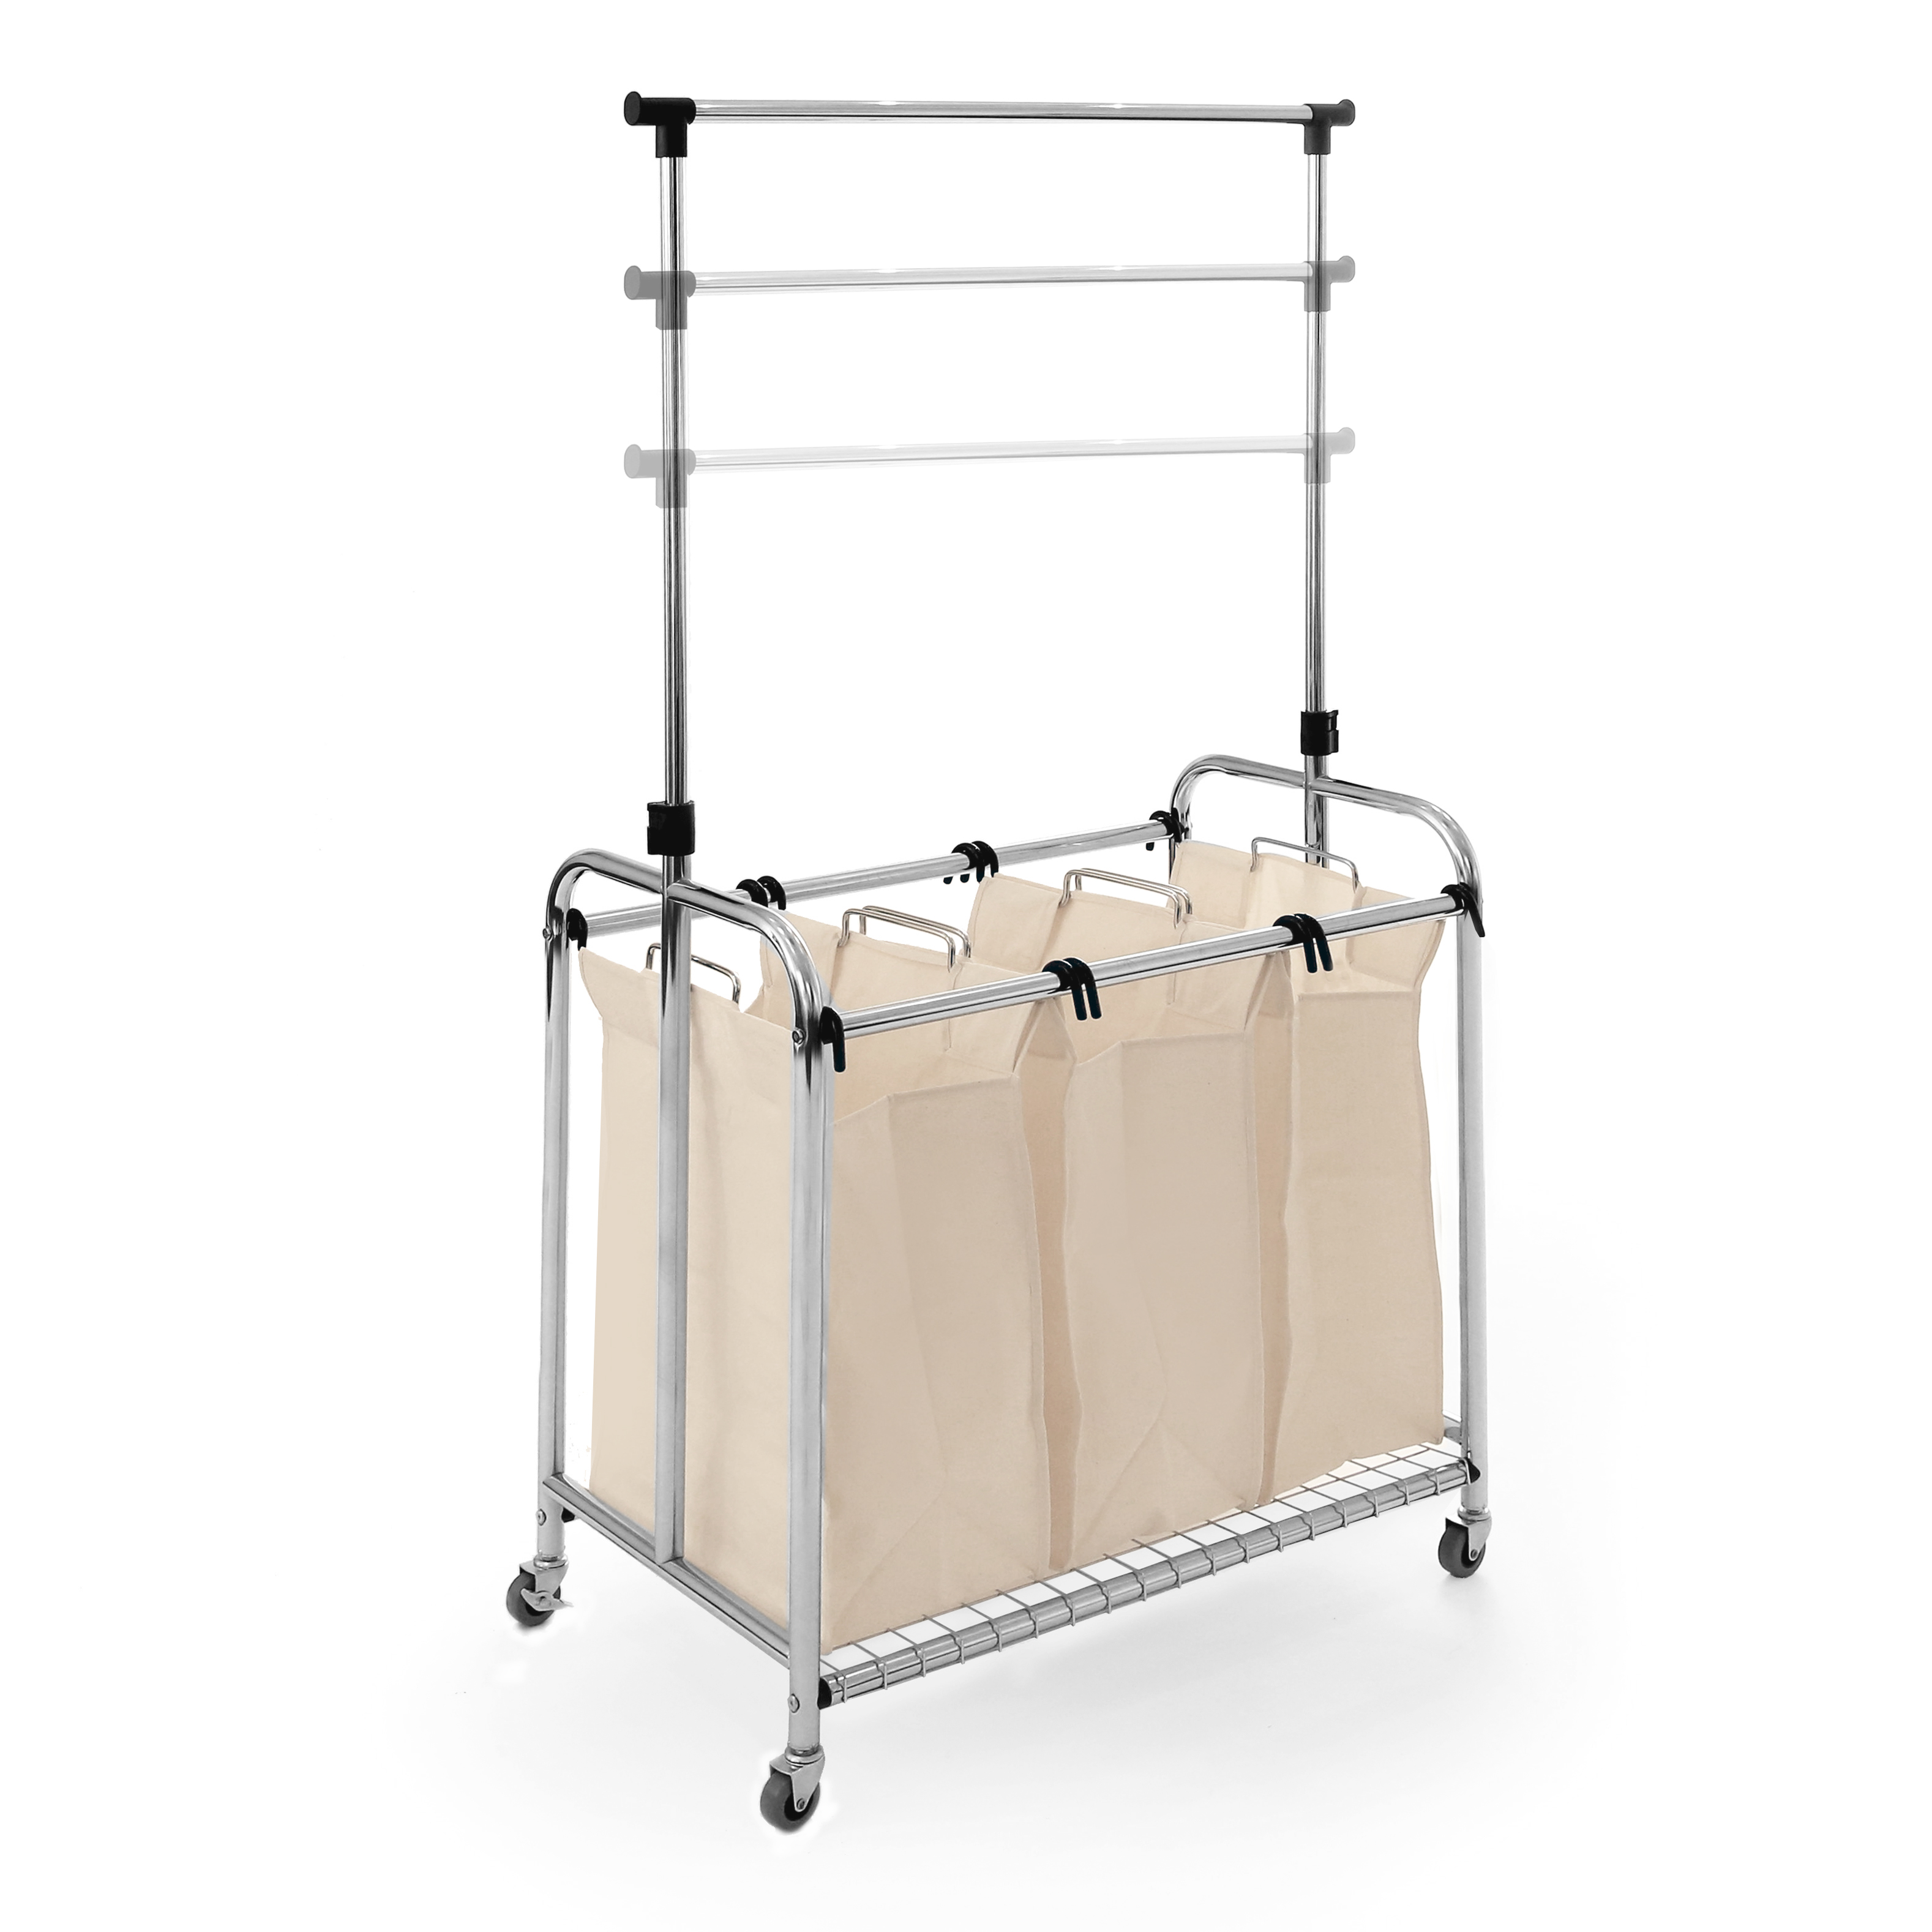 Seville Classics 3-Bag Heavy-Duty Laundry Sorter with Clothes Rack, Black, Off-white and Silver - image 5 of 11